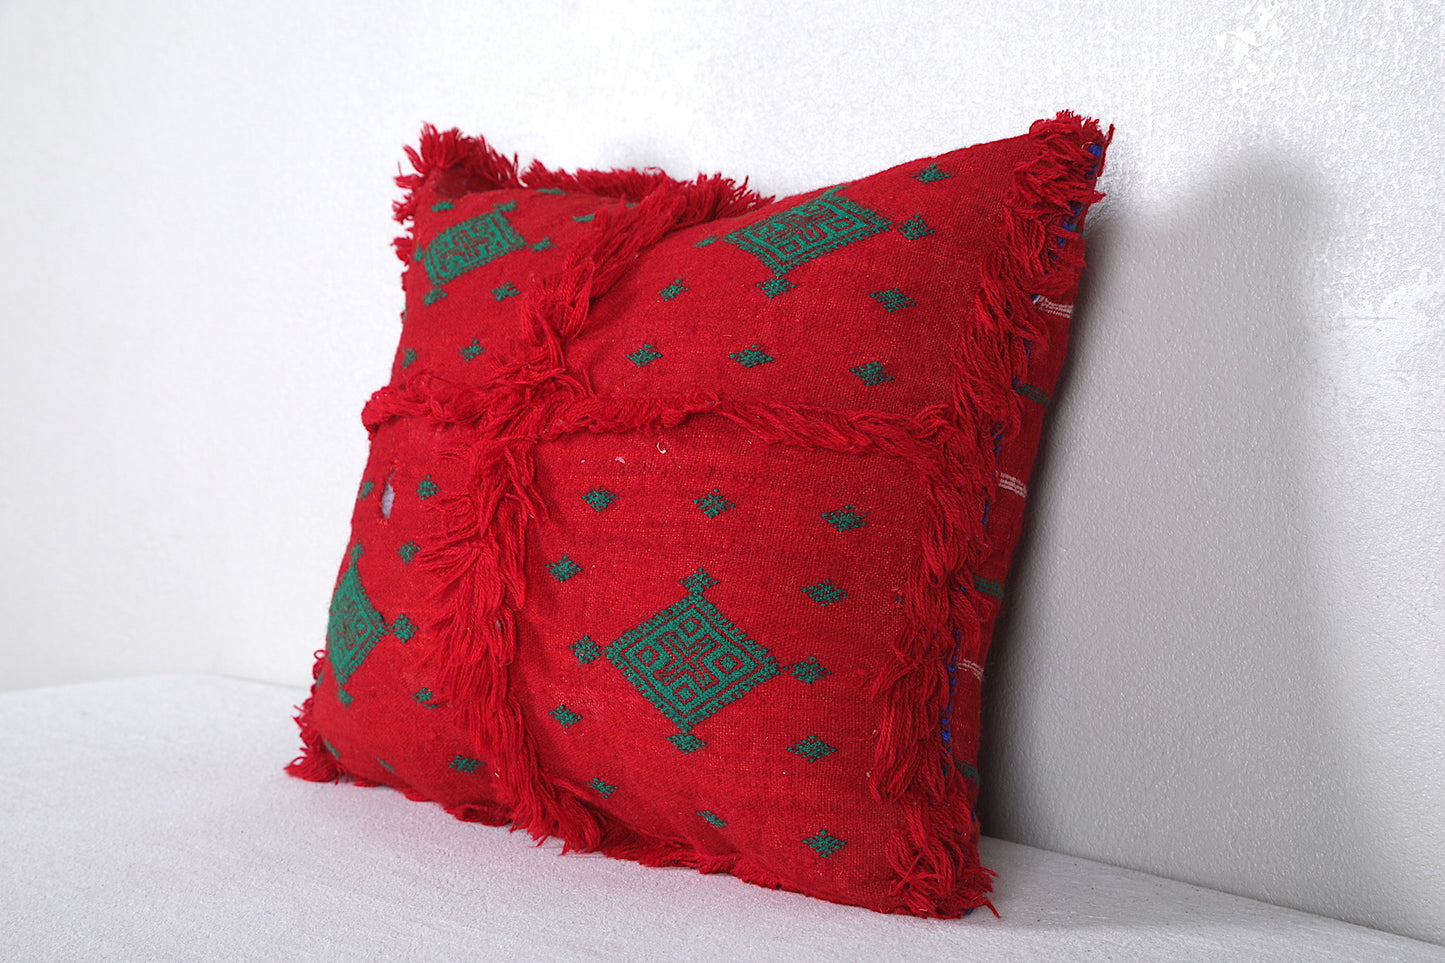 Moroccan red Pillow 14.9 INCHES X 18.1 INCHES